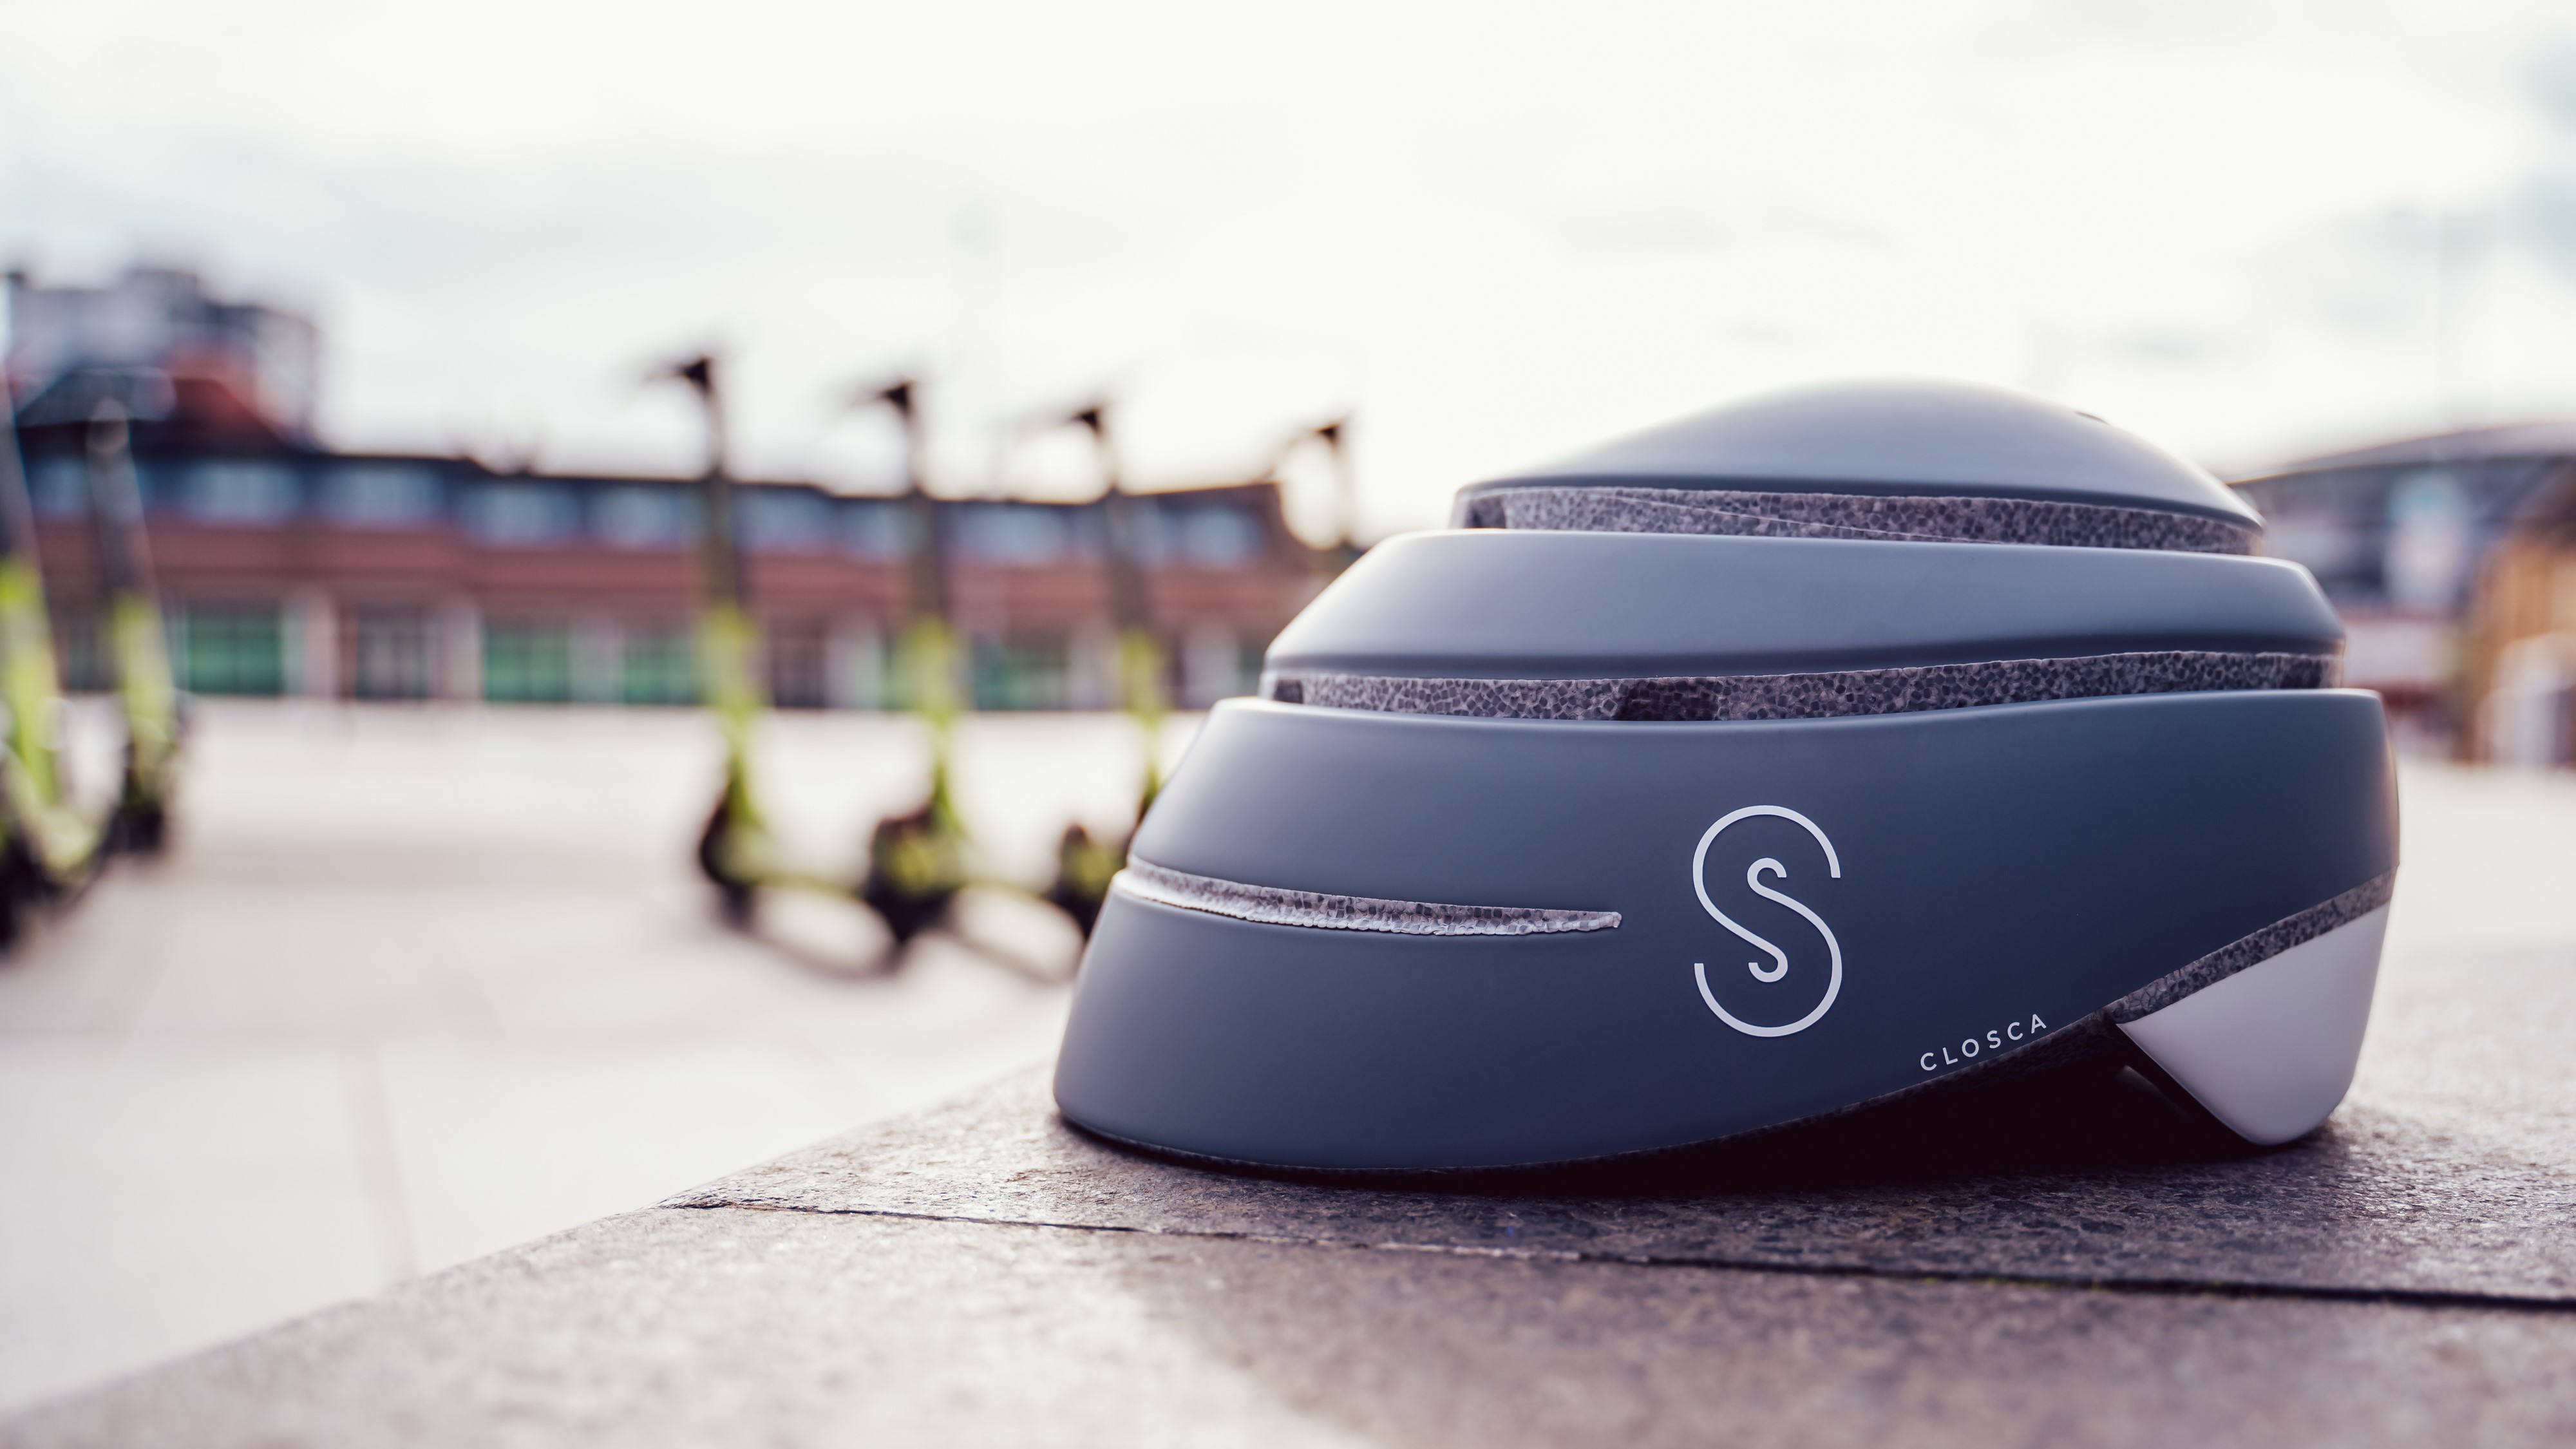 Foldable safety helmet with e-scooters in the background